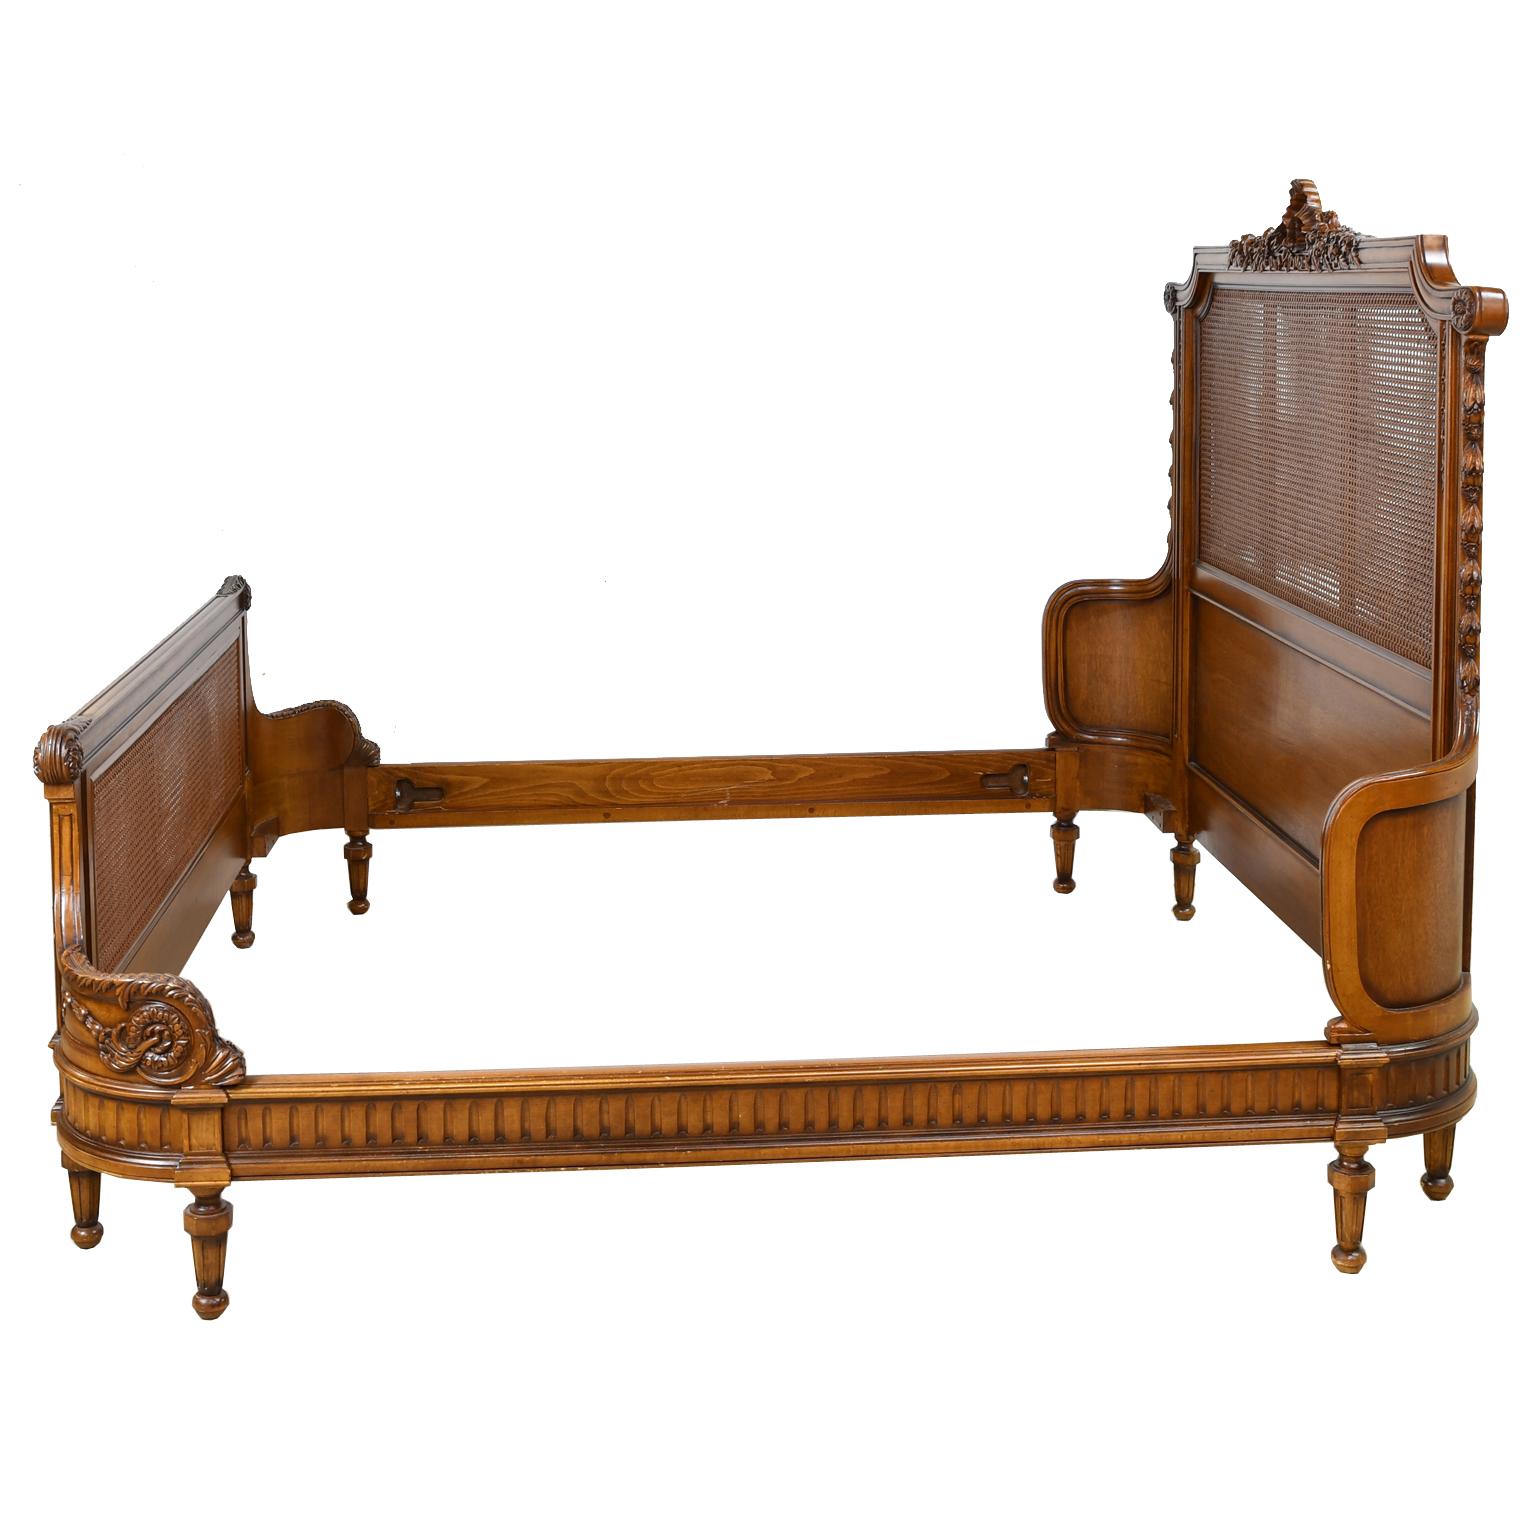 Contemporary Louis XVI Style King Size Bed with Walnut-Colored Wood Frame and Woven Caning